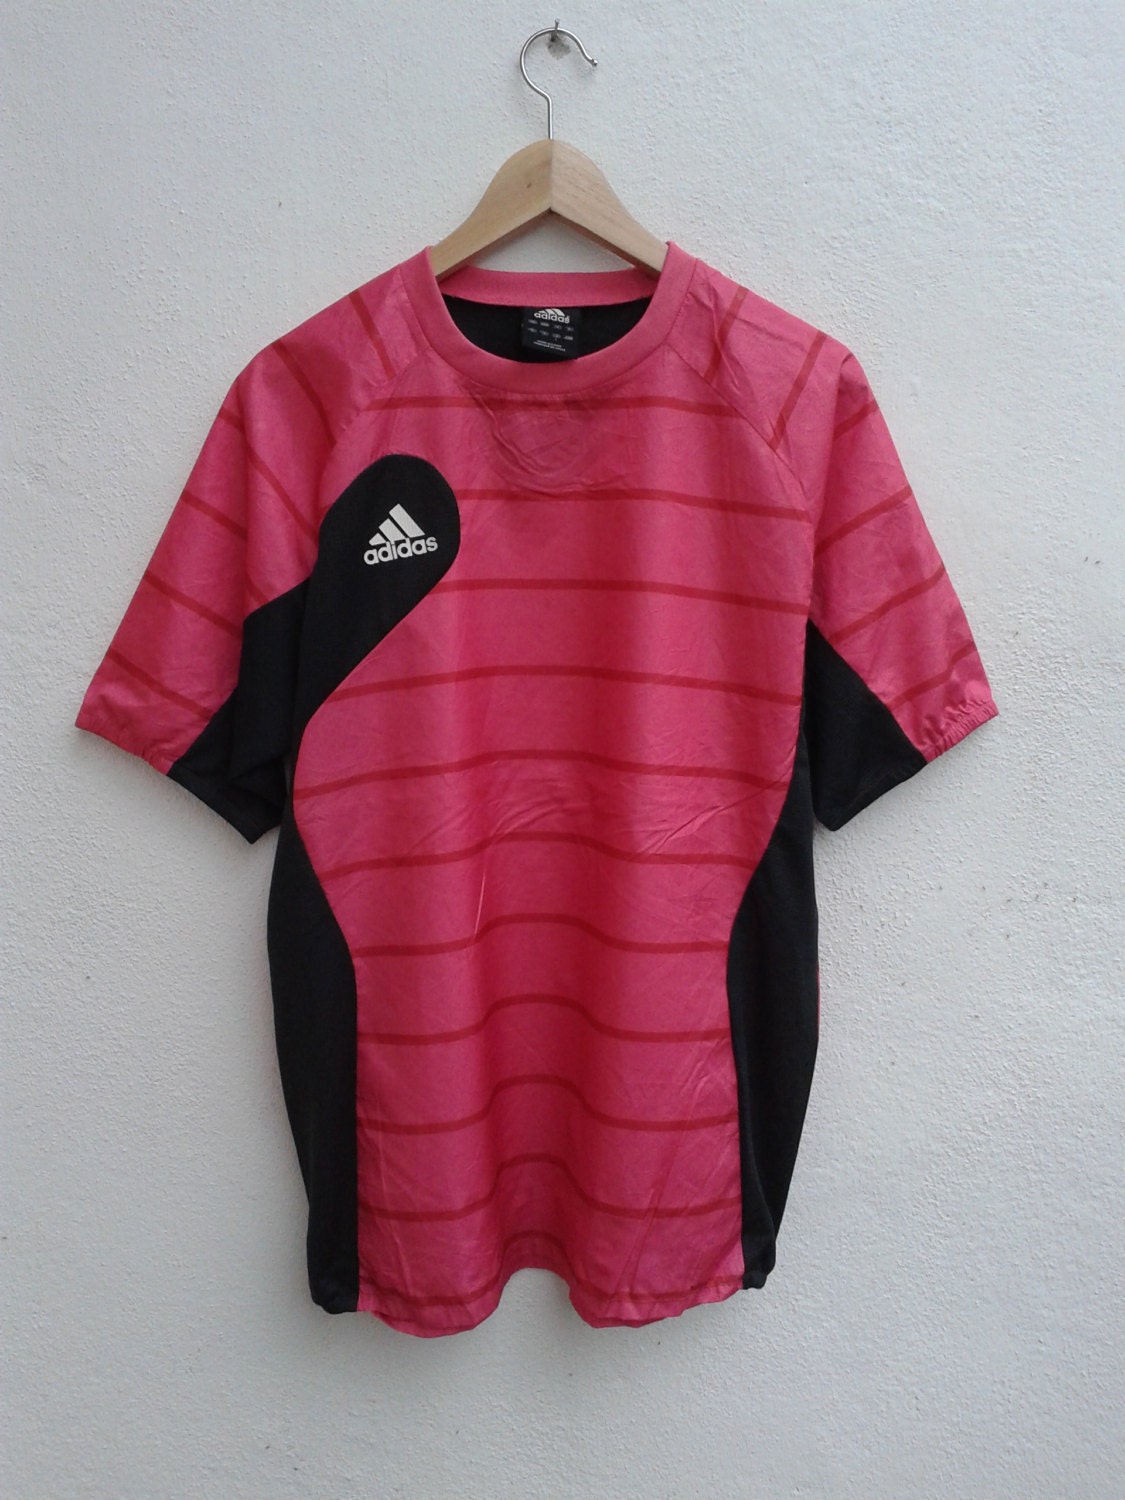 ON SALE 25% ADIDAS Sportswear Jersey Vintage 90s Pink Gym Track and ...